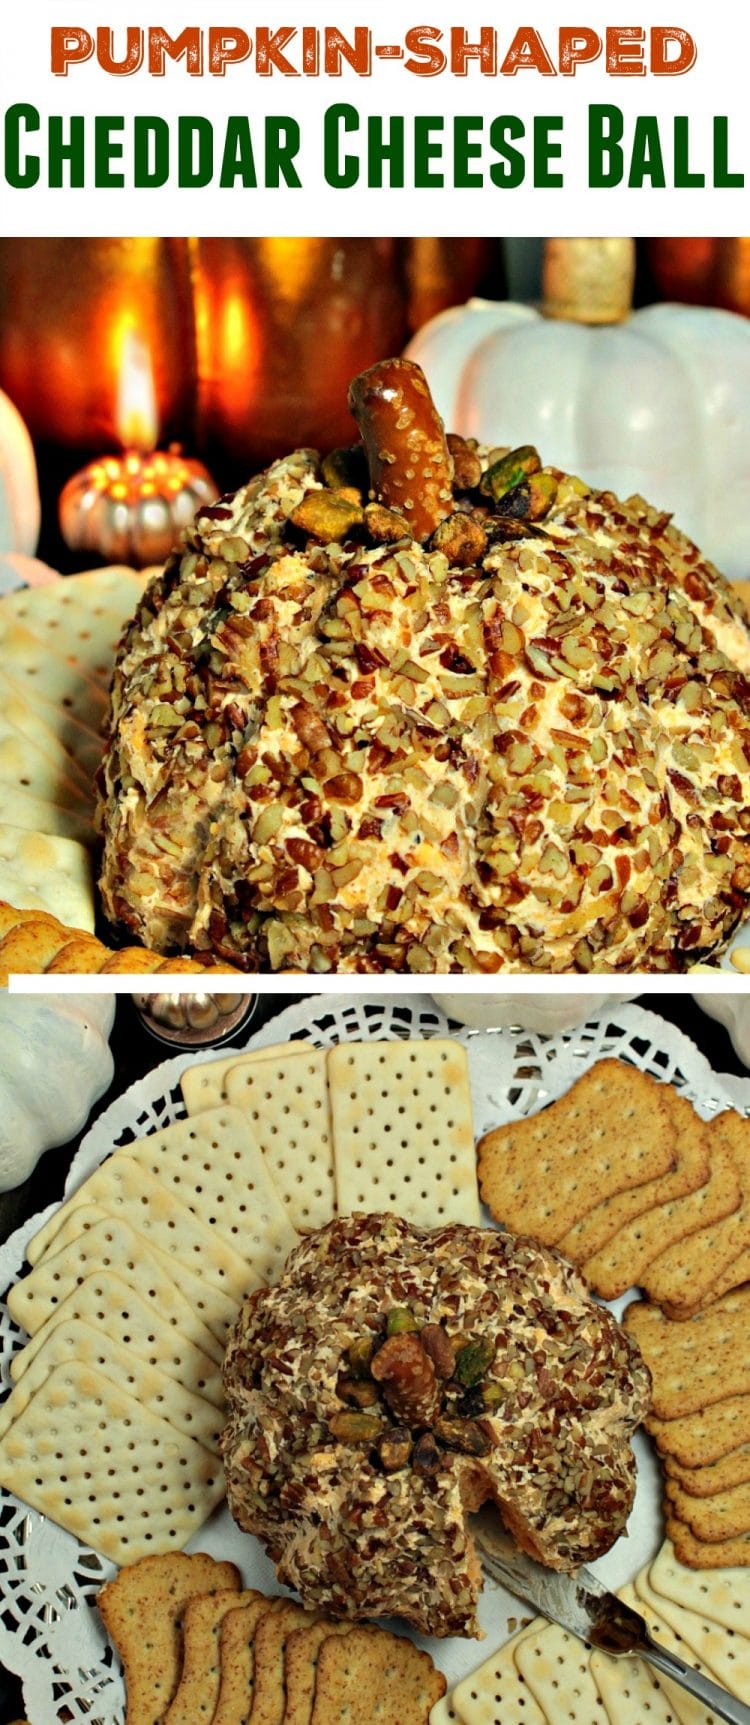 Pumpkin-Shaped Cheddar Cheese Ball - your guests will love the cute seasonal shape! There is no pumpkin in the recipe, the inside is savory smooth cheddar, cream cheese and spices. Great to eat right away and even better when made ahead!